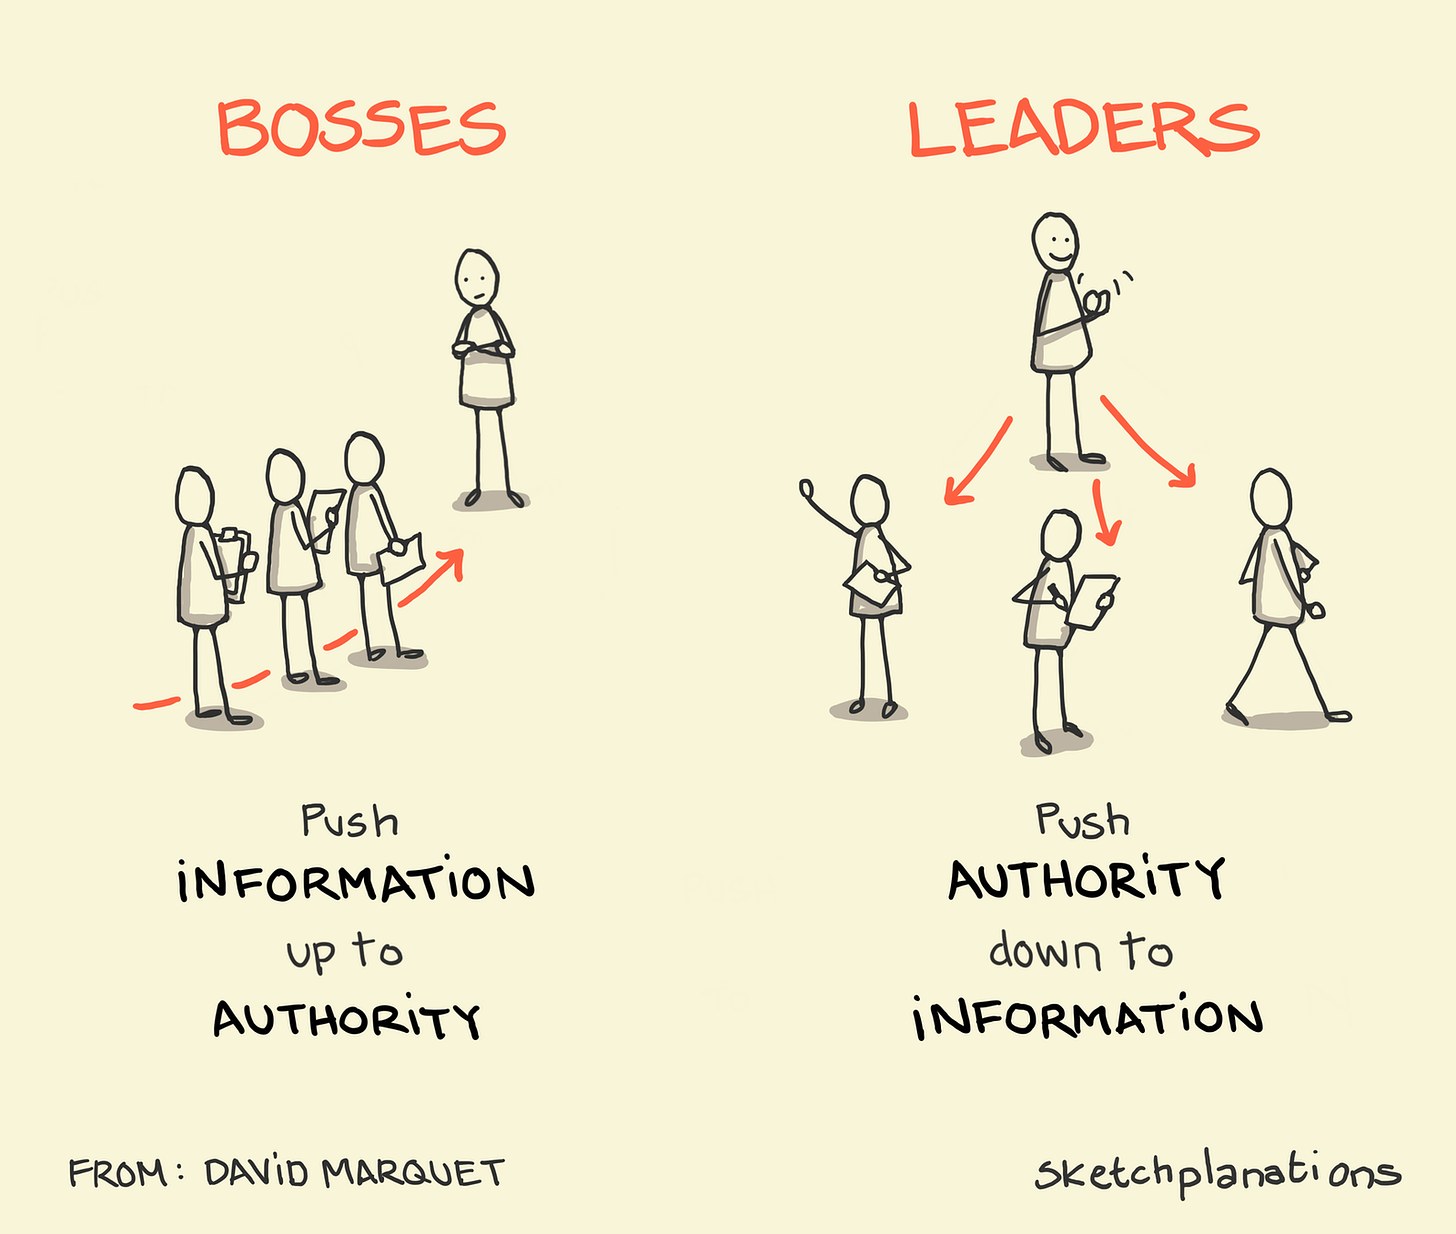 Push authority to information - Sketchplanations